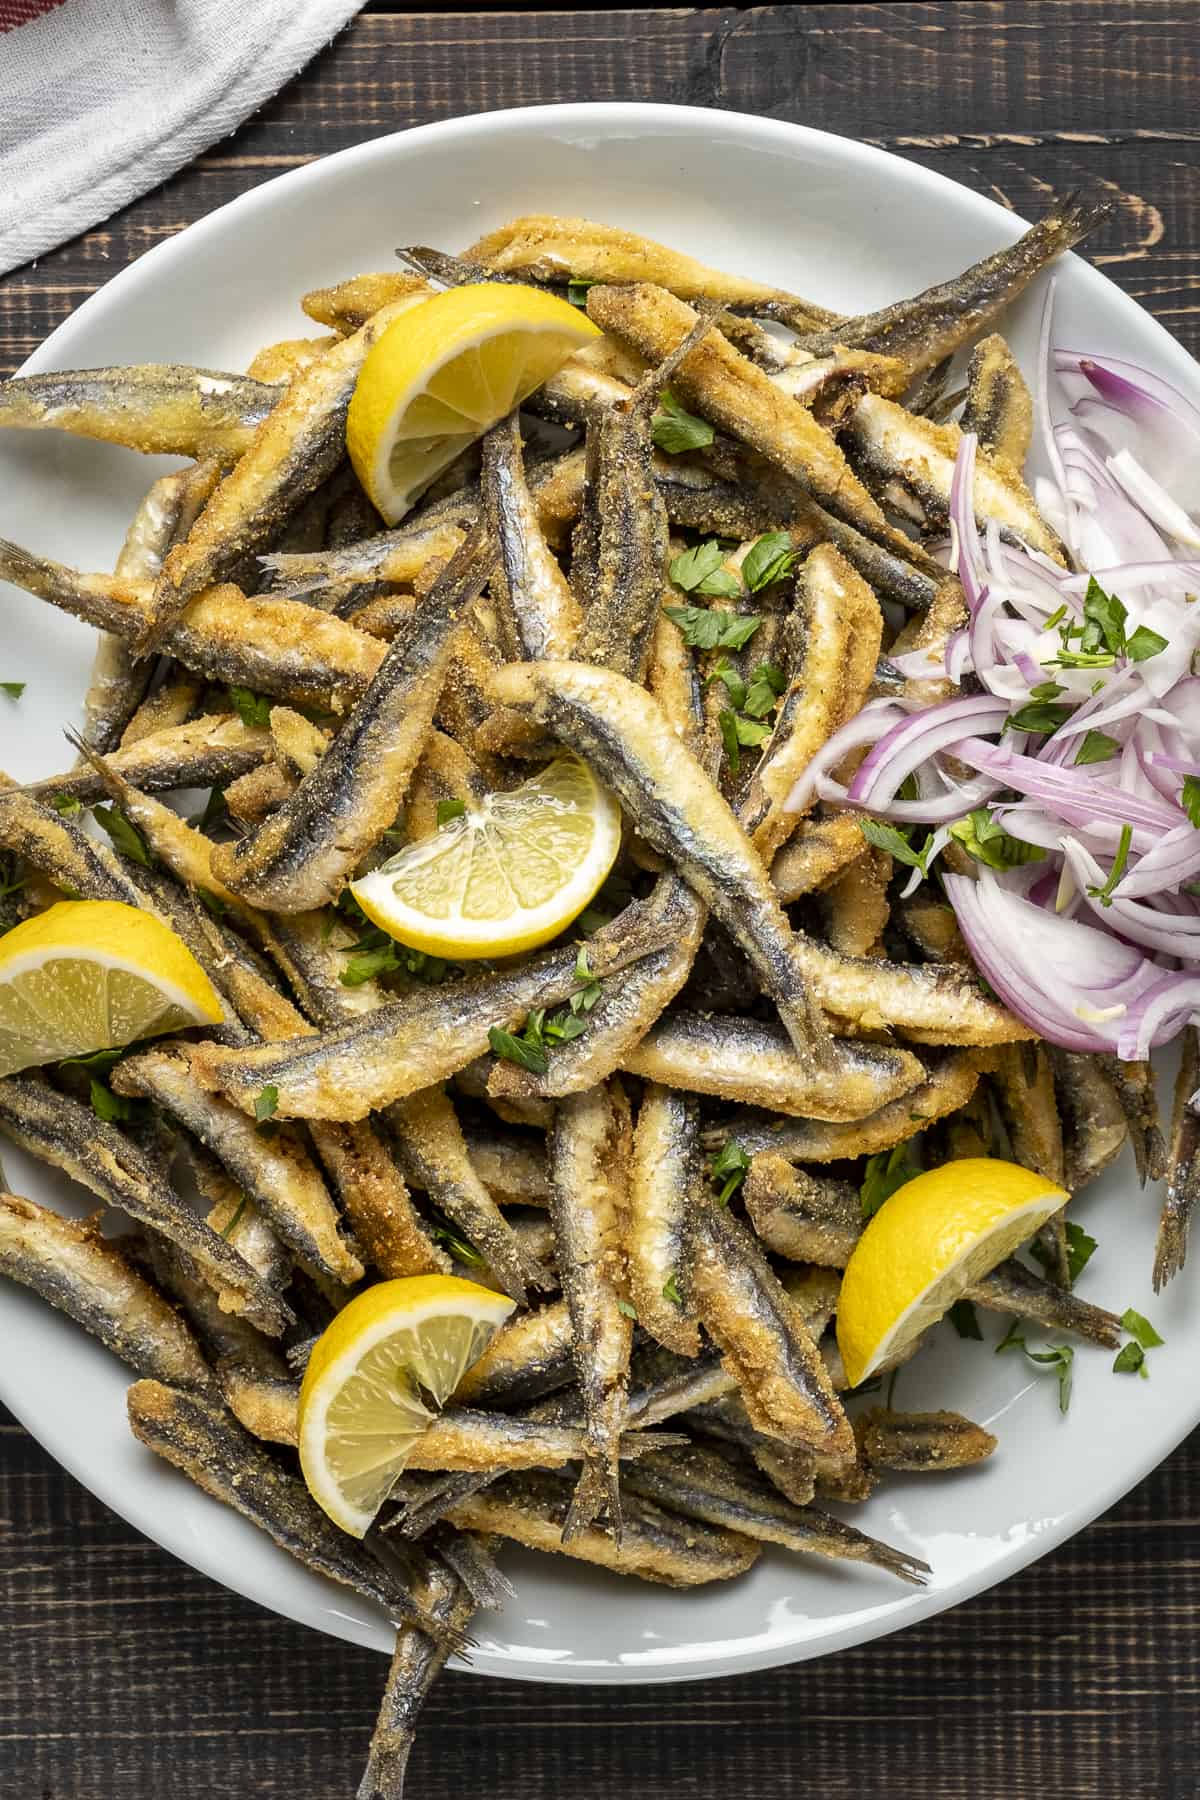 Fried anchovy fish on a plate with lemon wedges and sliced onions.